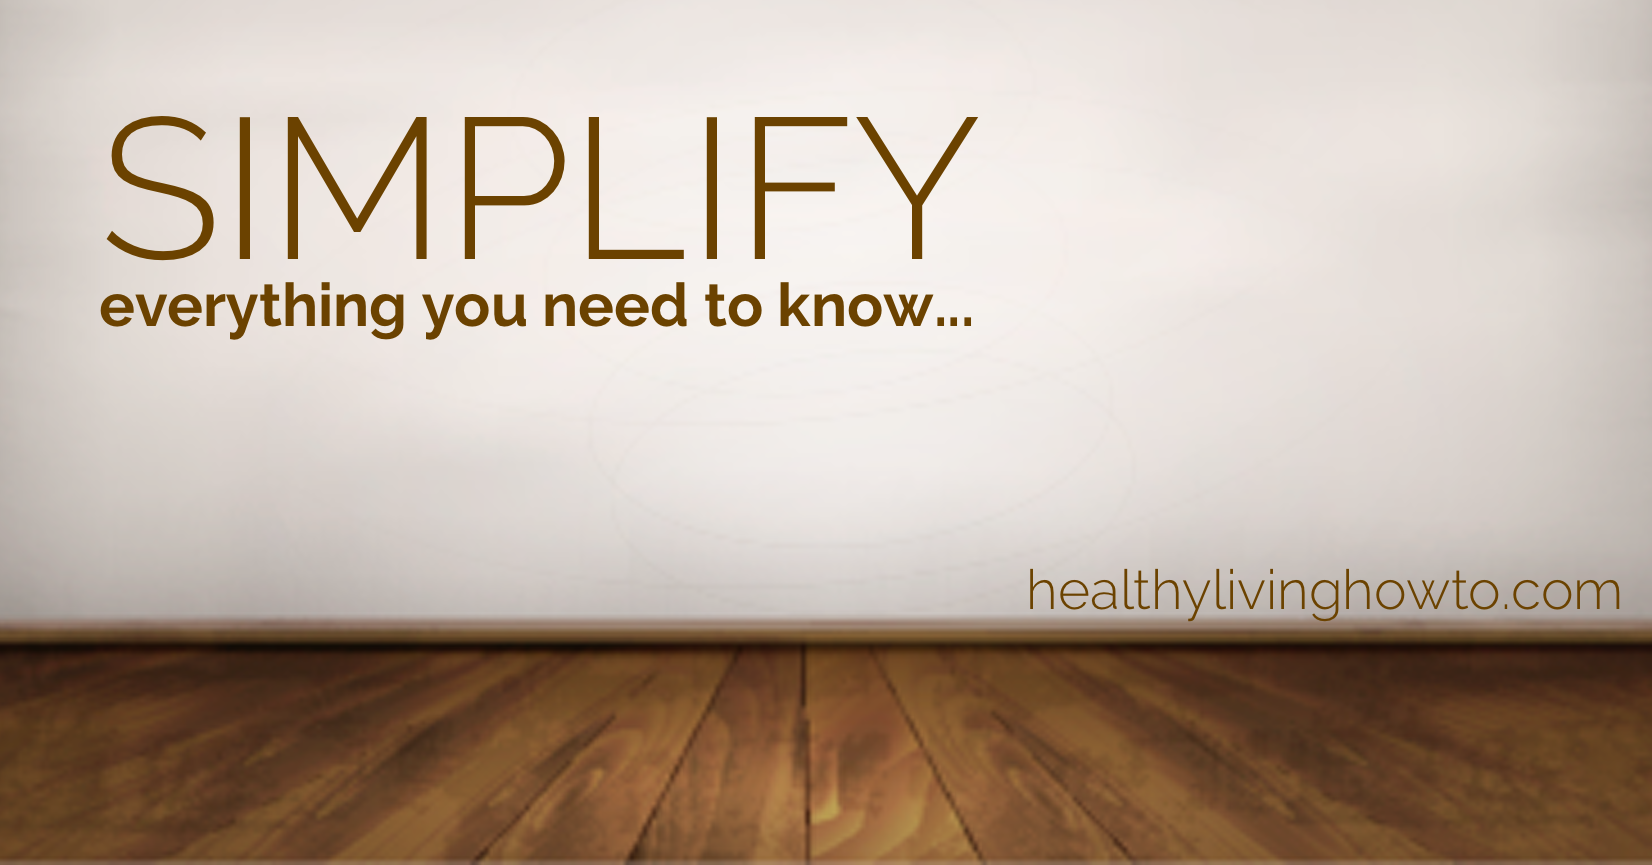 Simplify! Everything You Need To Know | healthylivinghowto.com